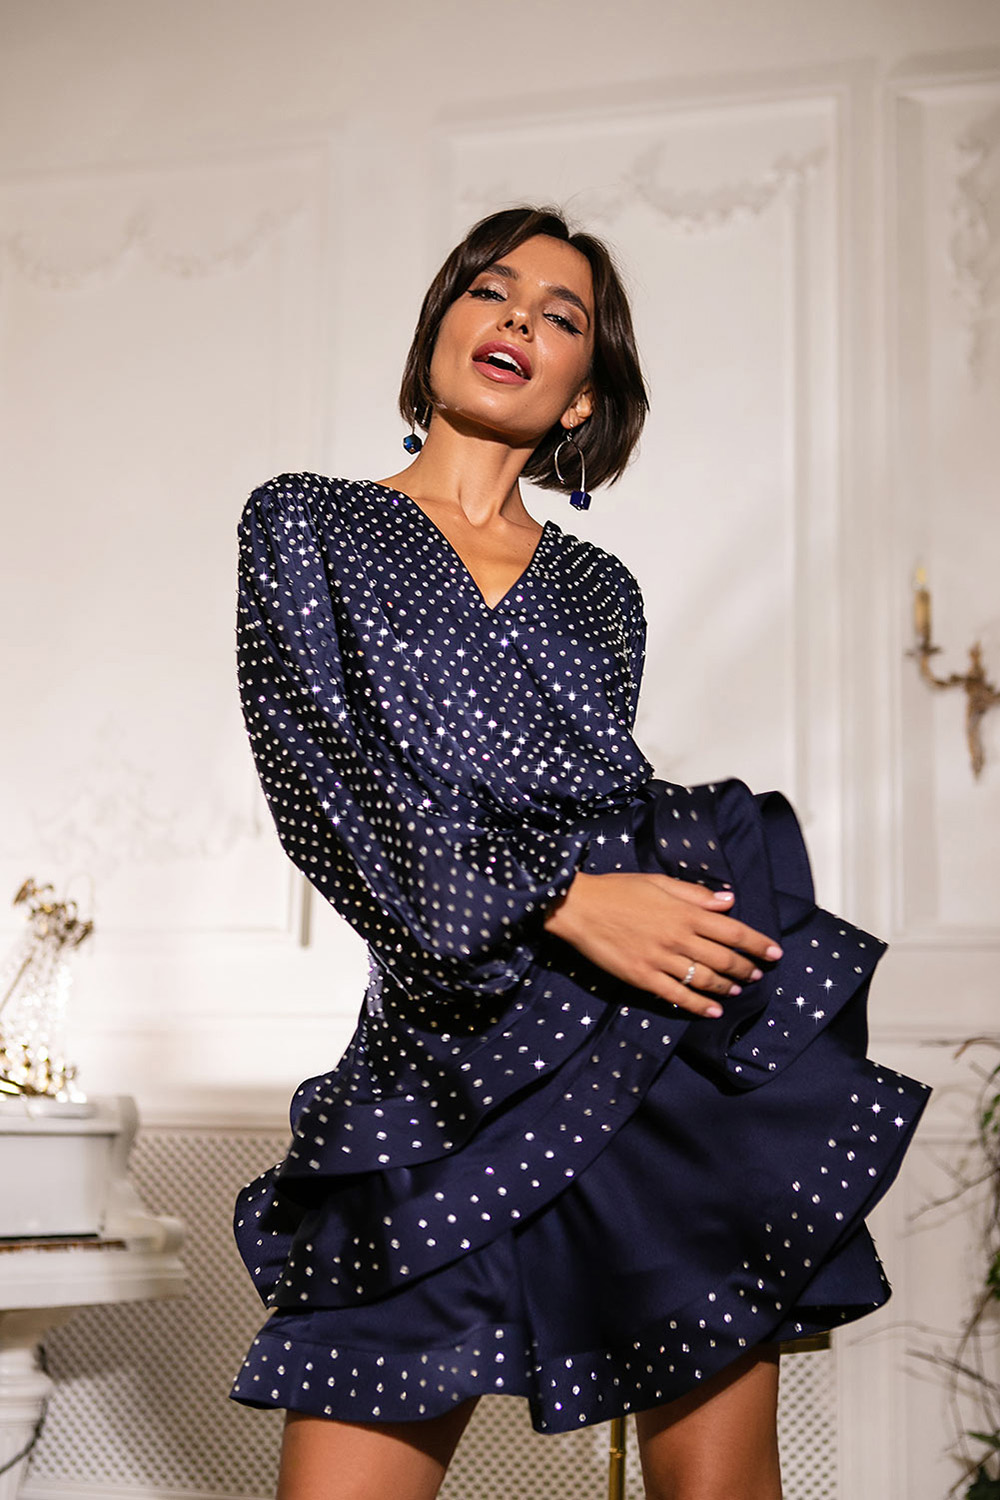 Anna Chibisova’s Brand Maison D’AngelAnn Launches Sparkling Collection for the Holiday Season